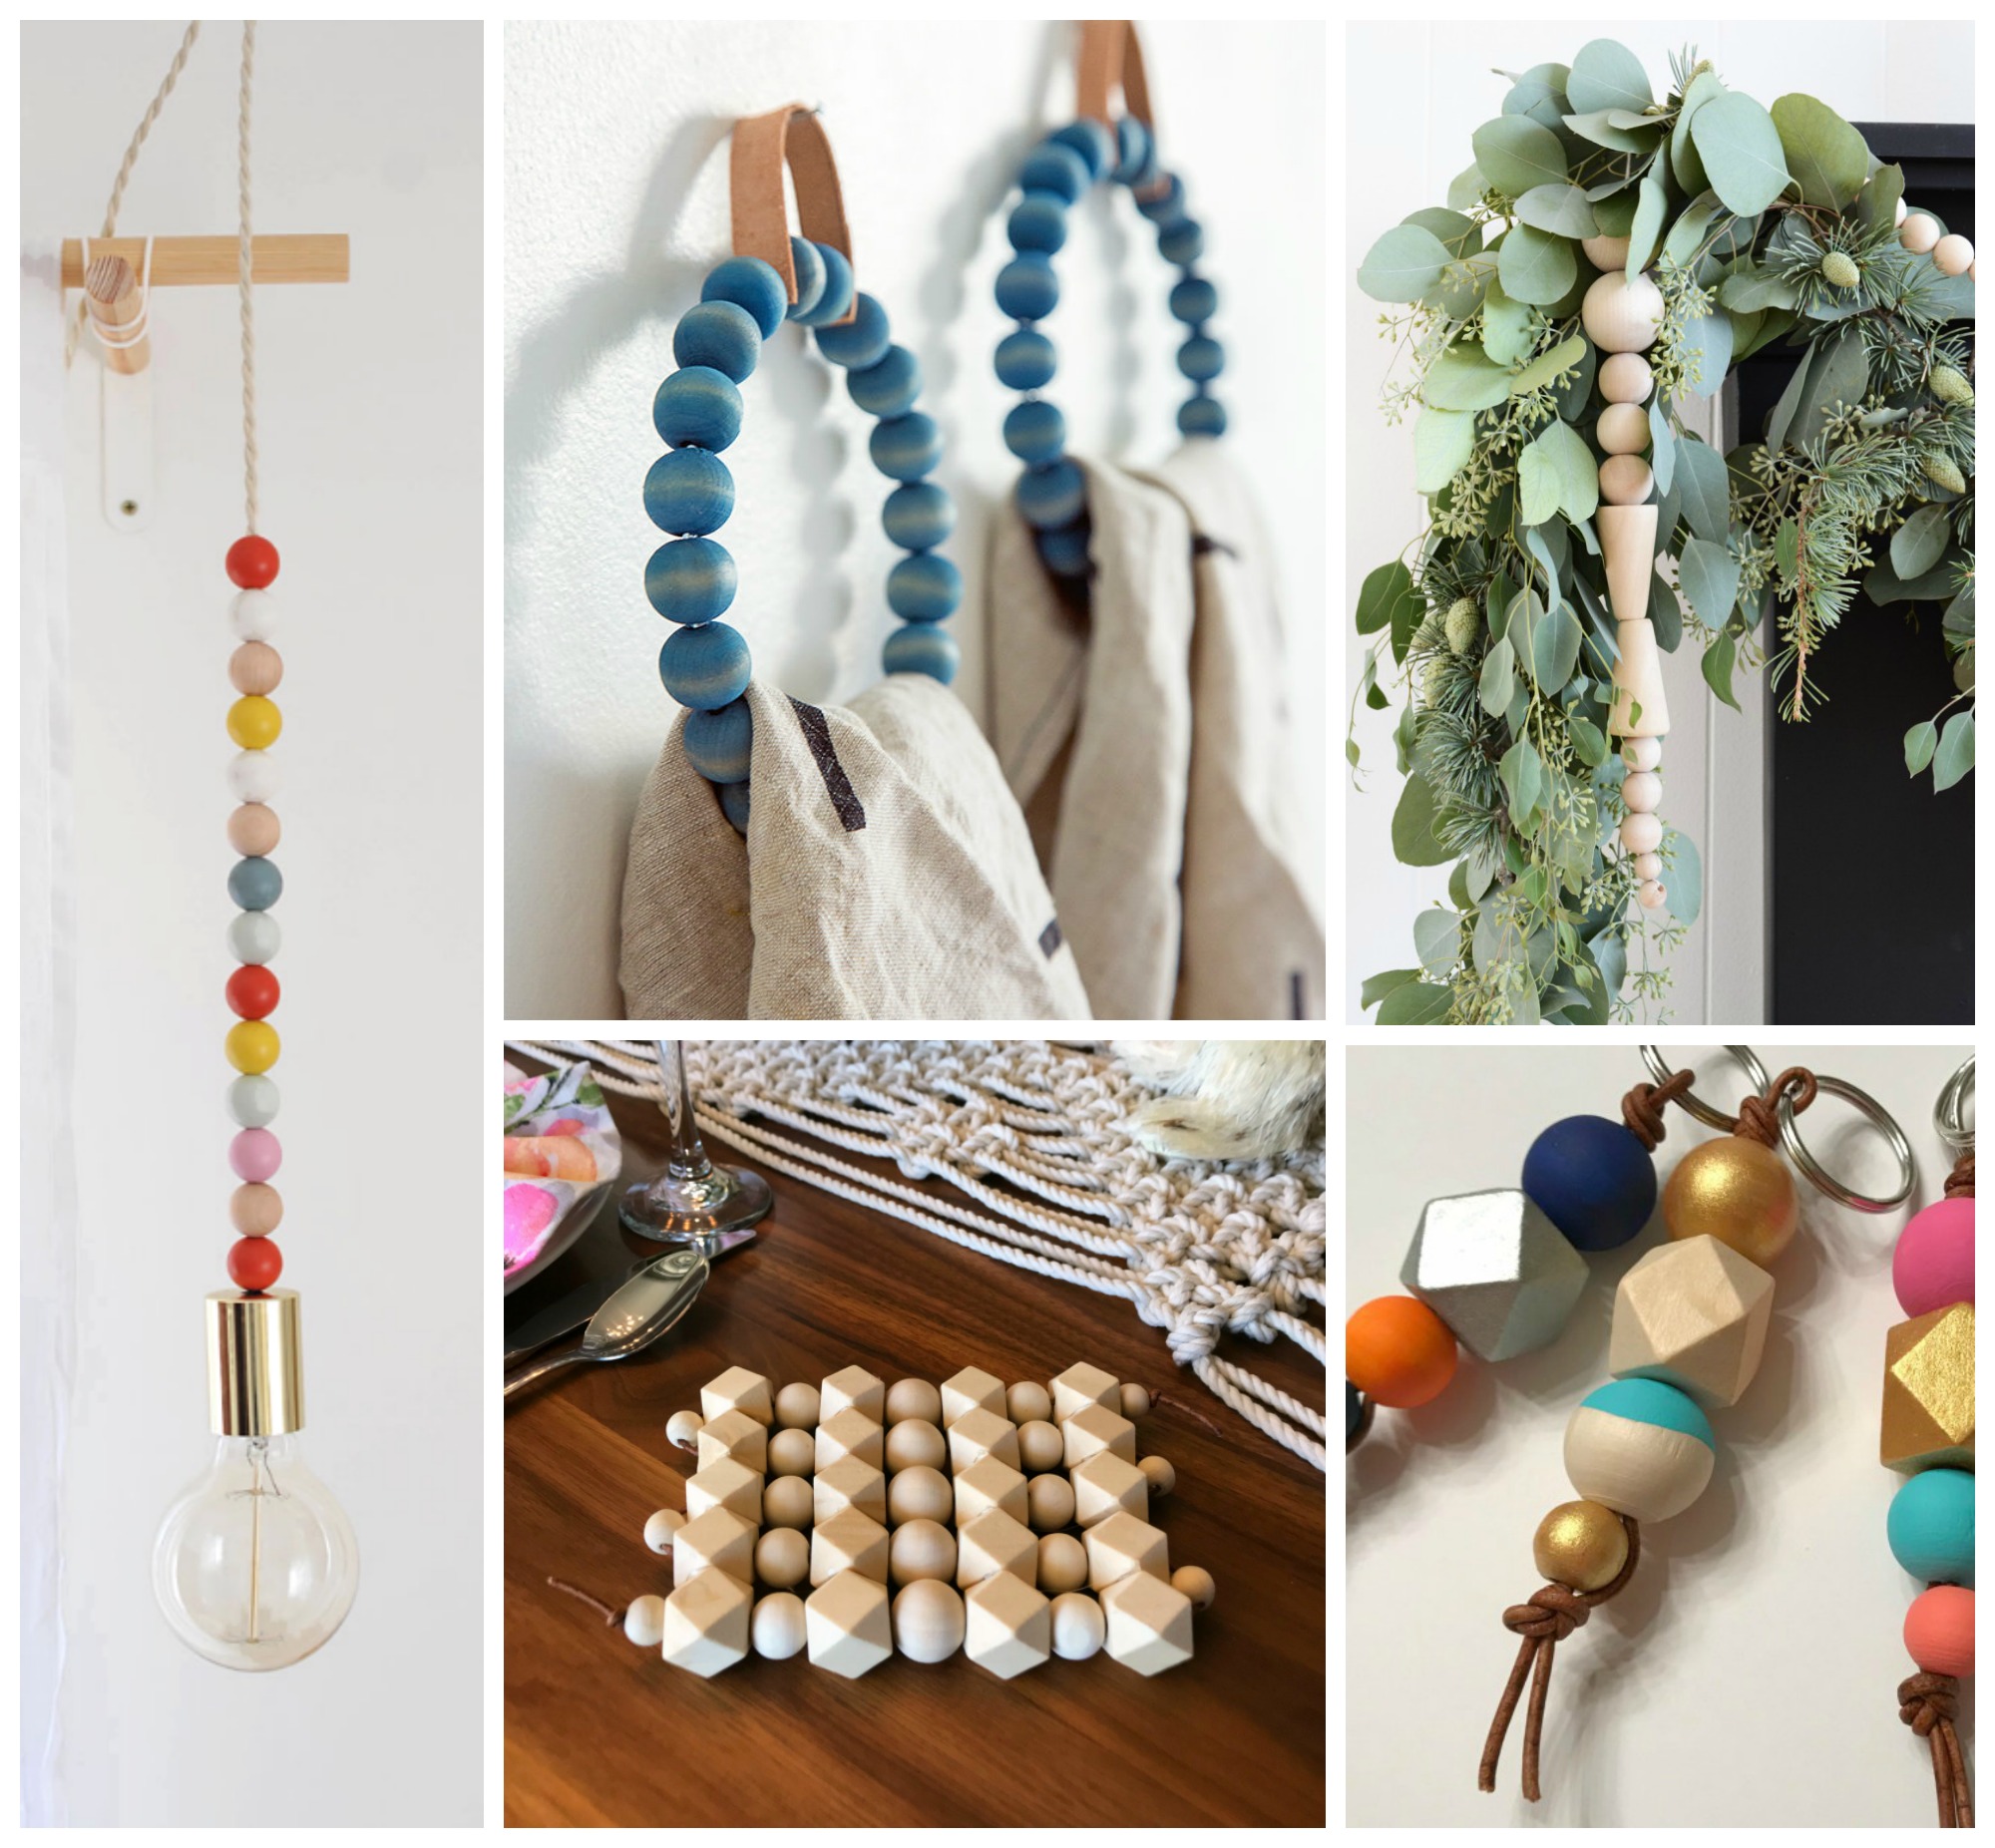 modern & hip wooden bead projects - My French Twist